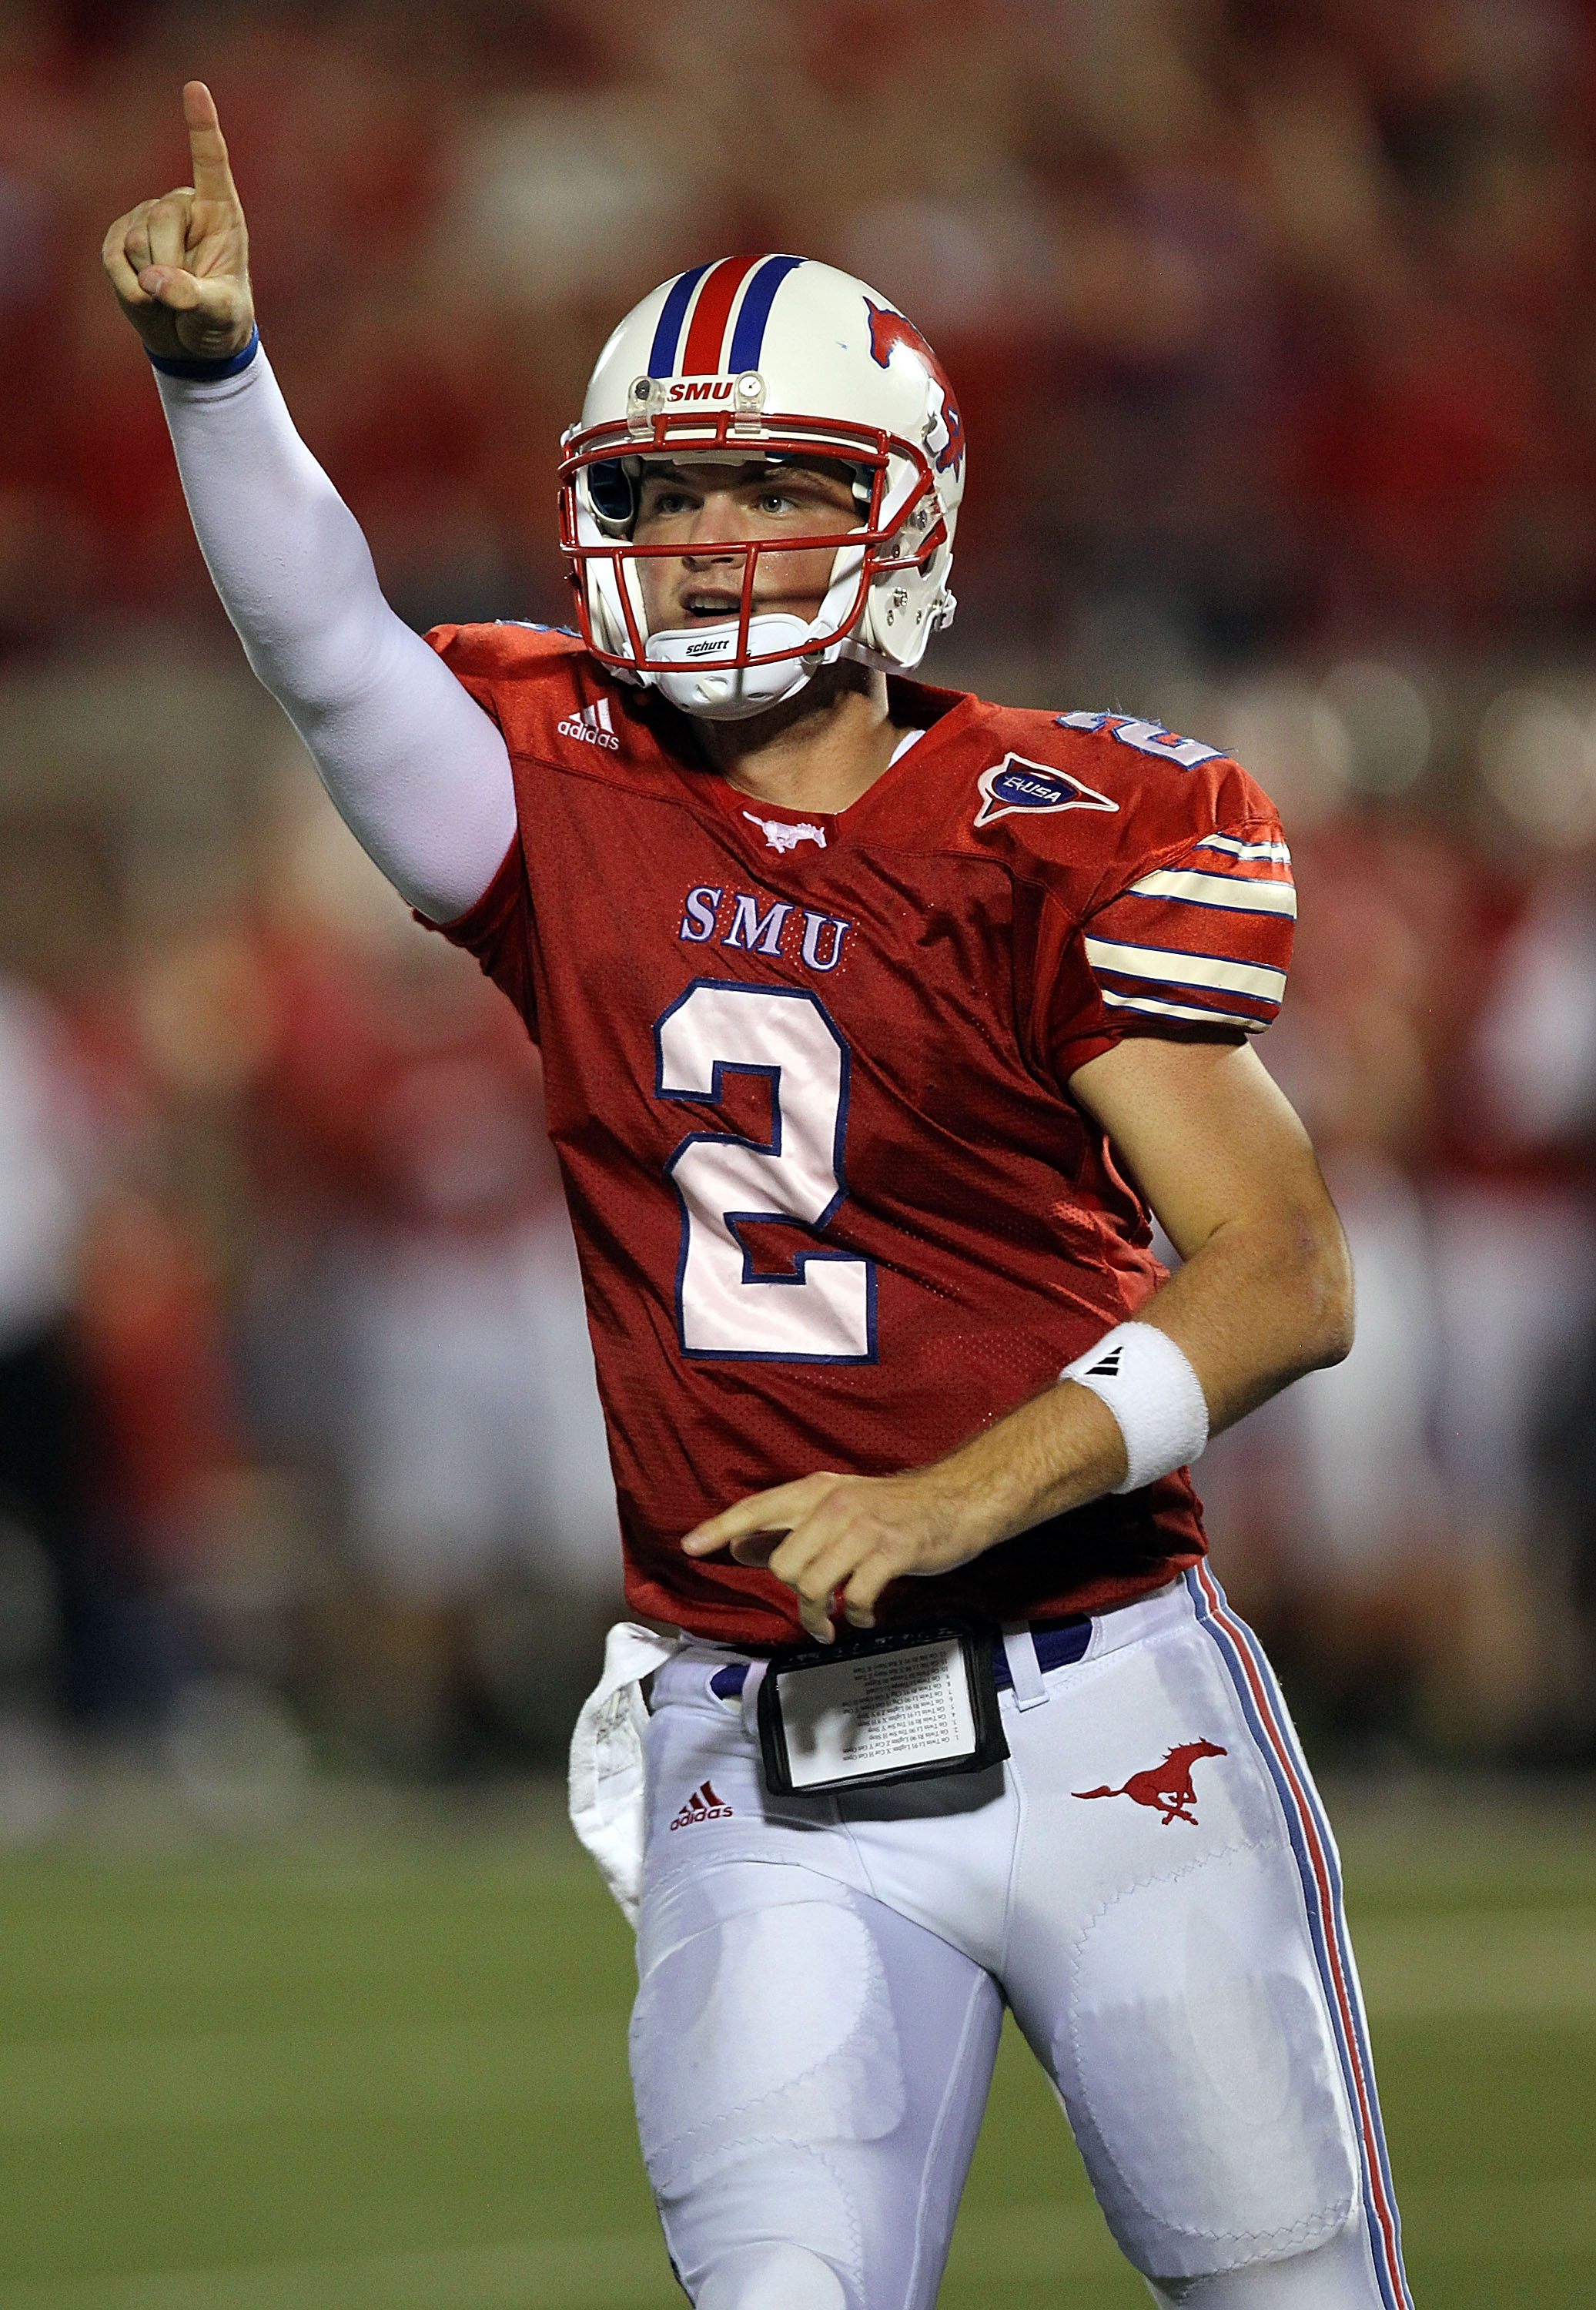 DALLAS - SEPTEMBER 24:  Quarterback Kyle Padron #2 of the SMU Mustangs celebrates a touchdown in the third quarter against the TCU Horned Frogs at Gerald J. Ford Stadium on September 24, 2010 in Dallas, Texas.  (Photo by Ronald Martinez/Getty Images)